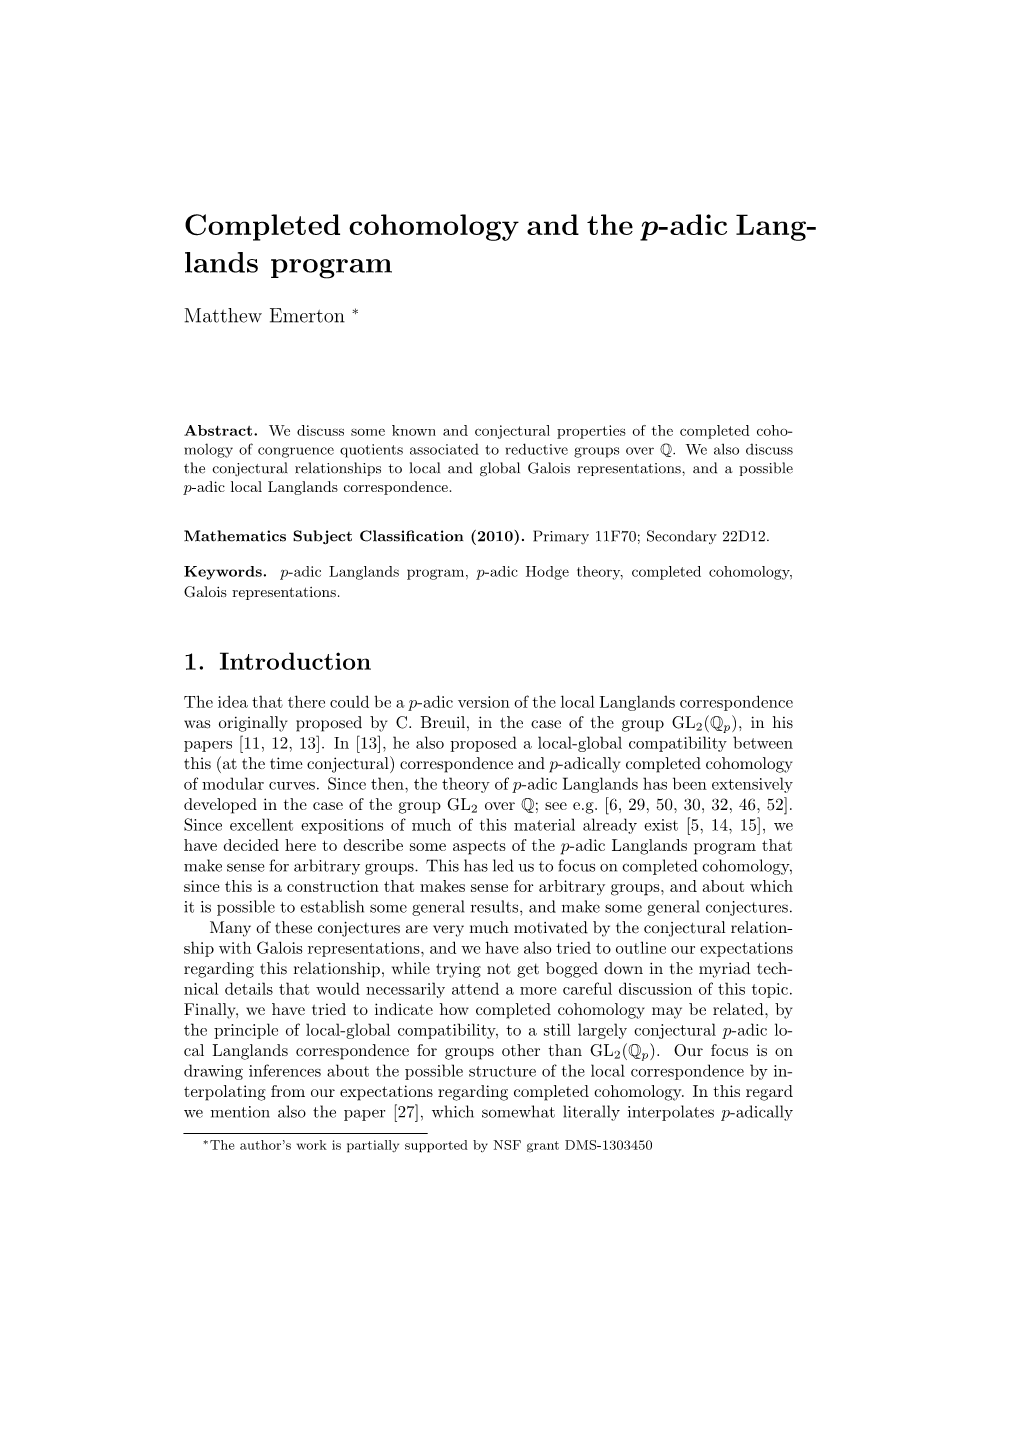 Completed Cohomology and the P-Adic Lang- Lands Program